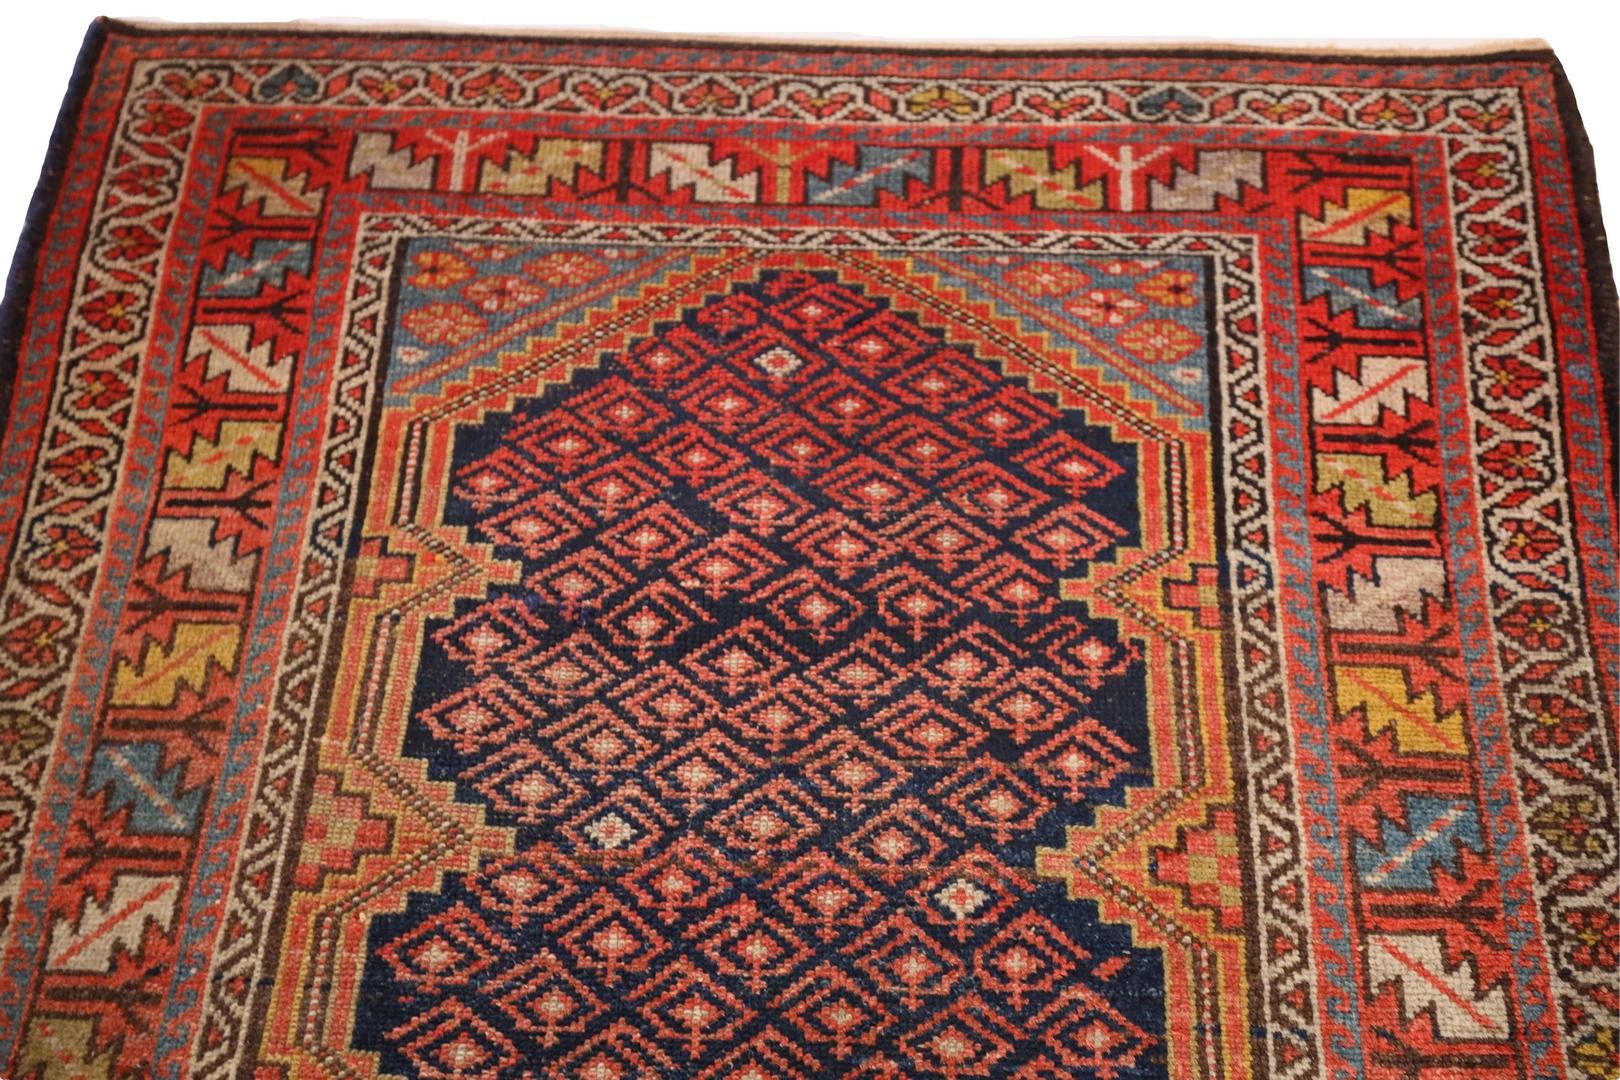 Wool Malayer Antique Rug, Red Navy - 3' x 6'6